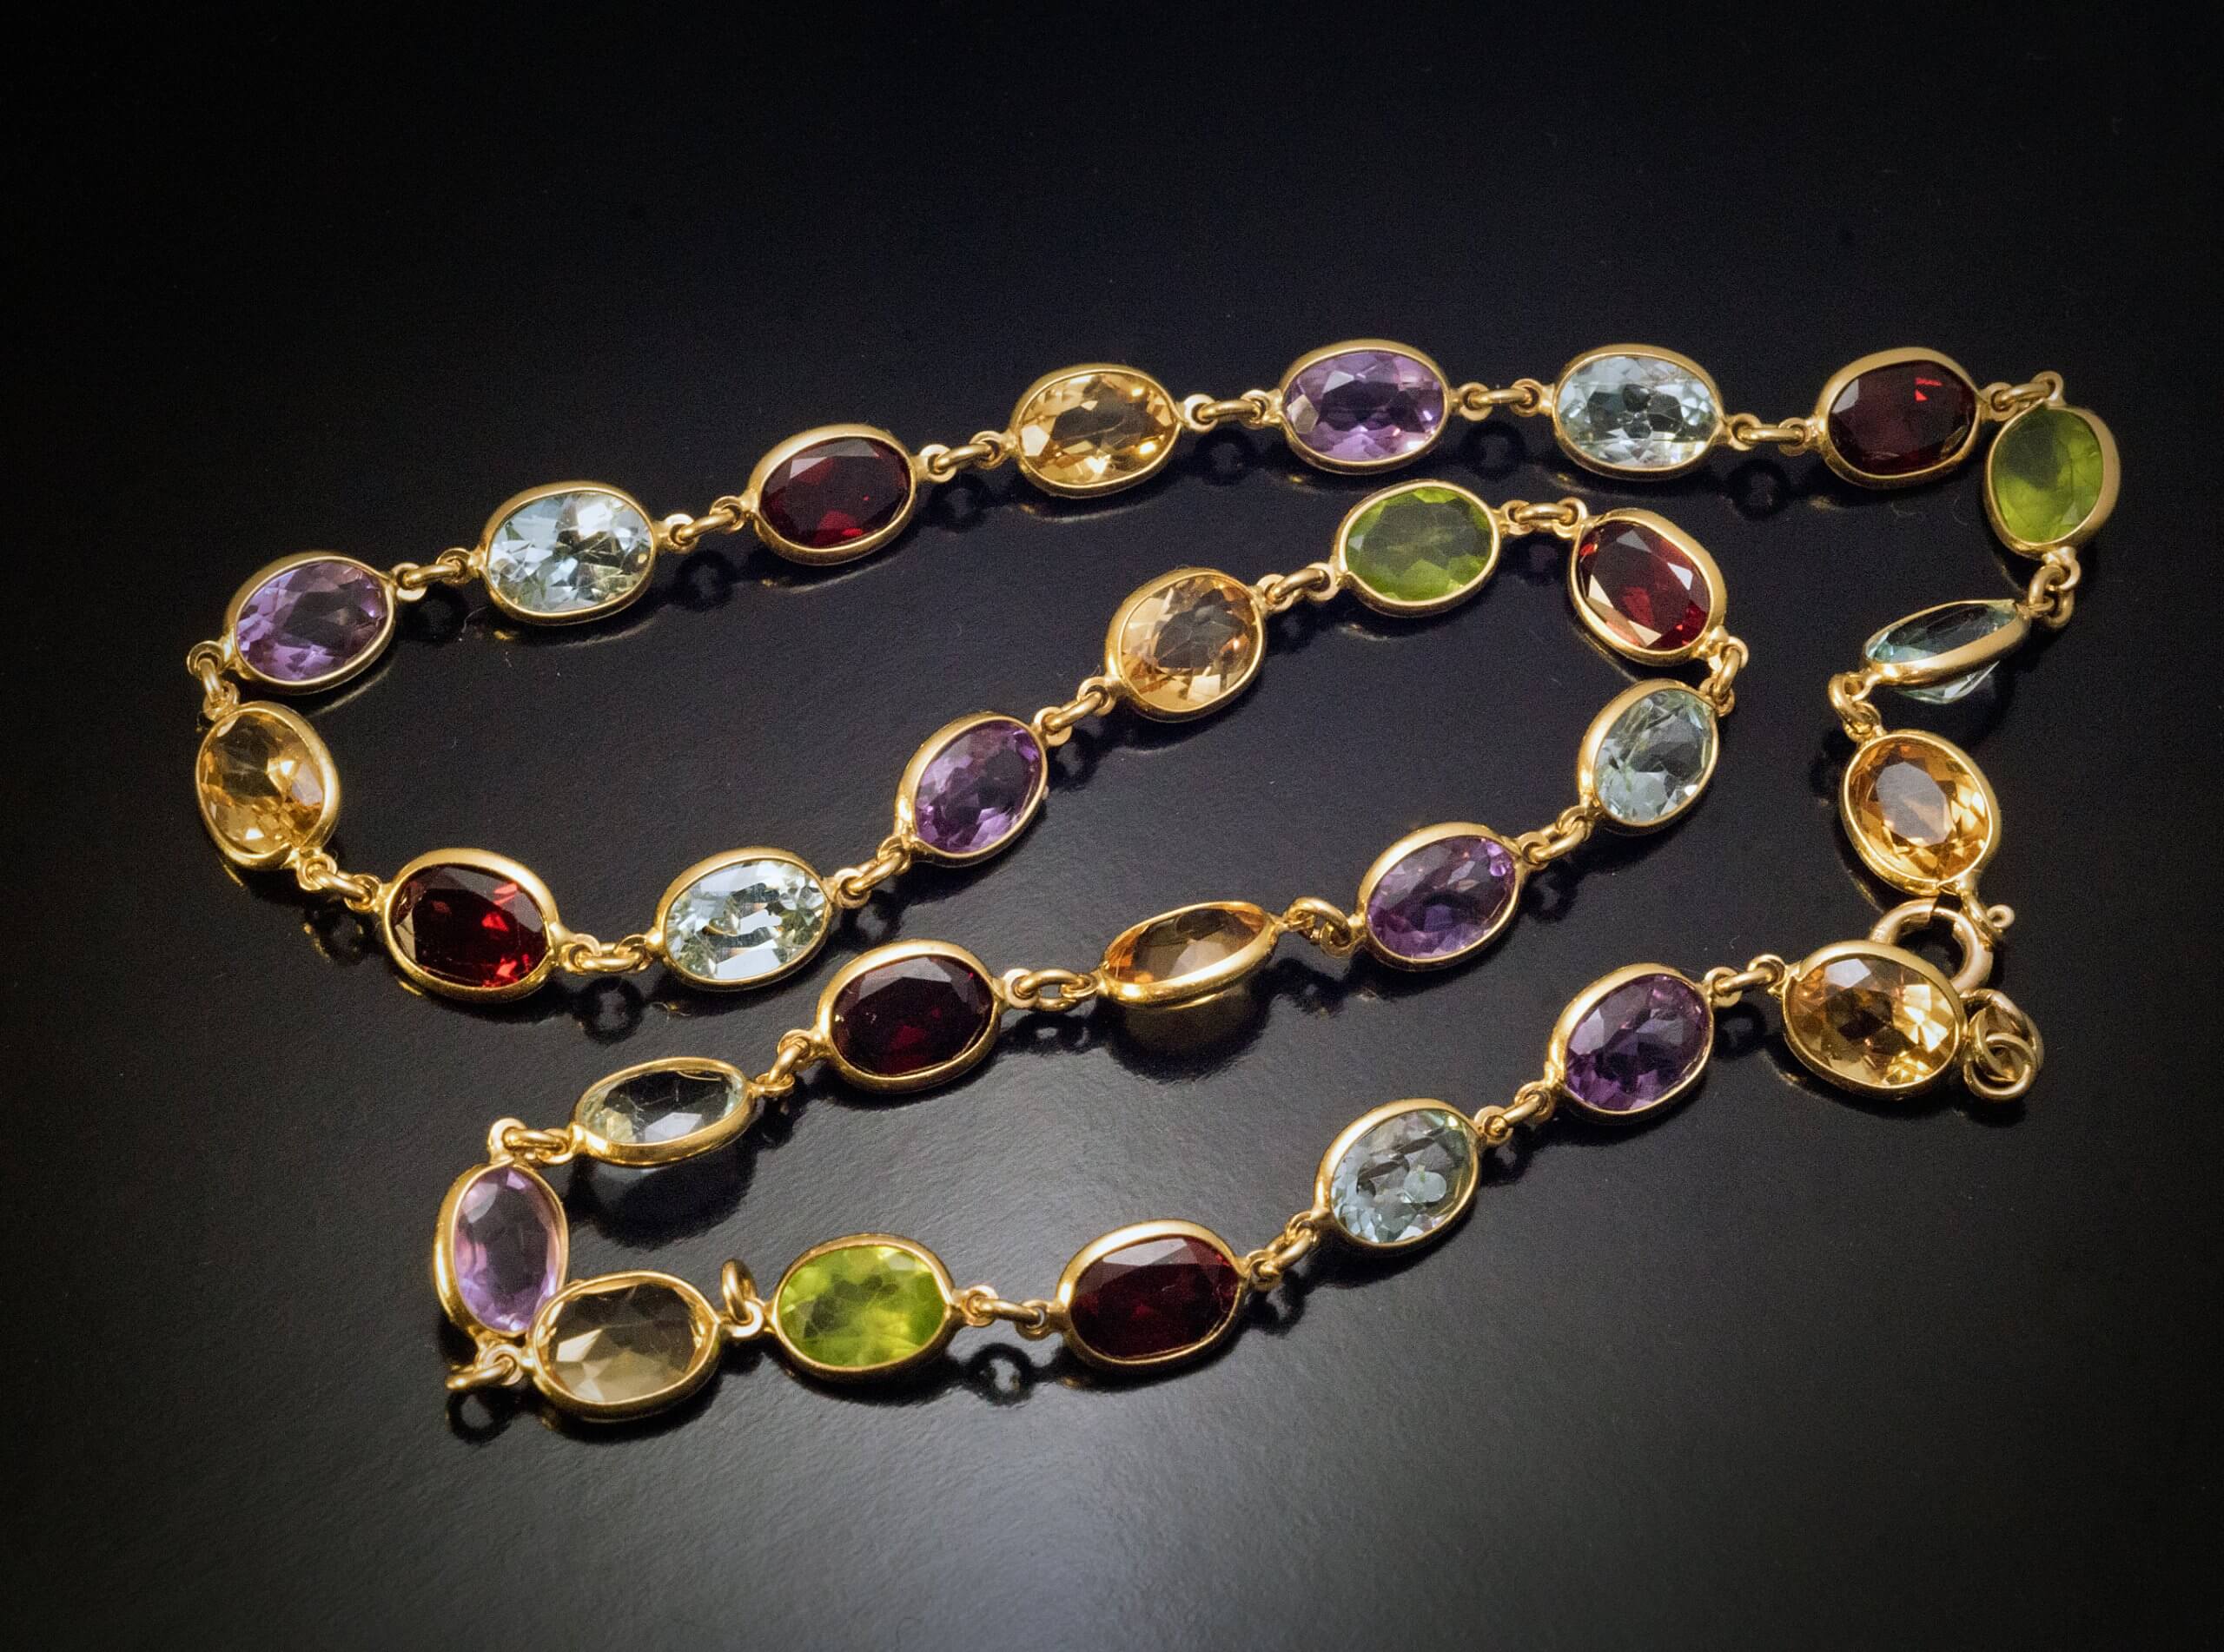 Italian Multi Colored Gemstone Gold Necklace Ref: 980442 - Antique Jewelry, Vintage Rings, Faberge EggsAntique Jewelry, Vintage Rings